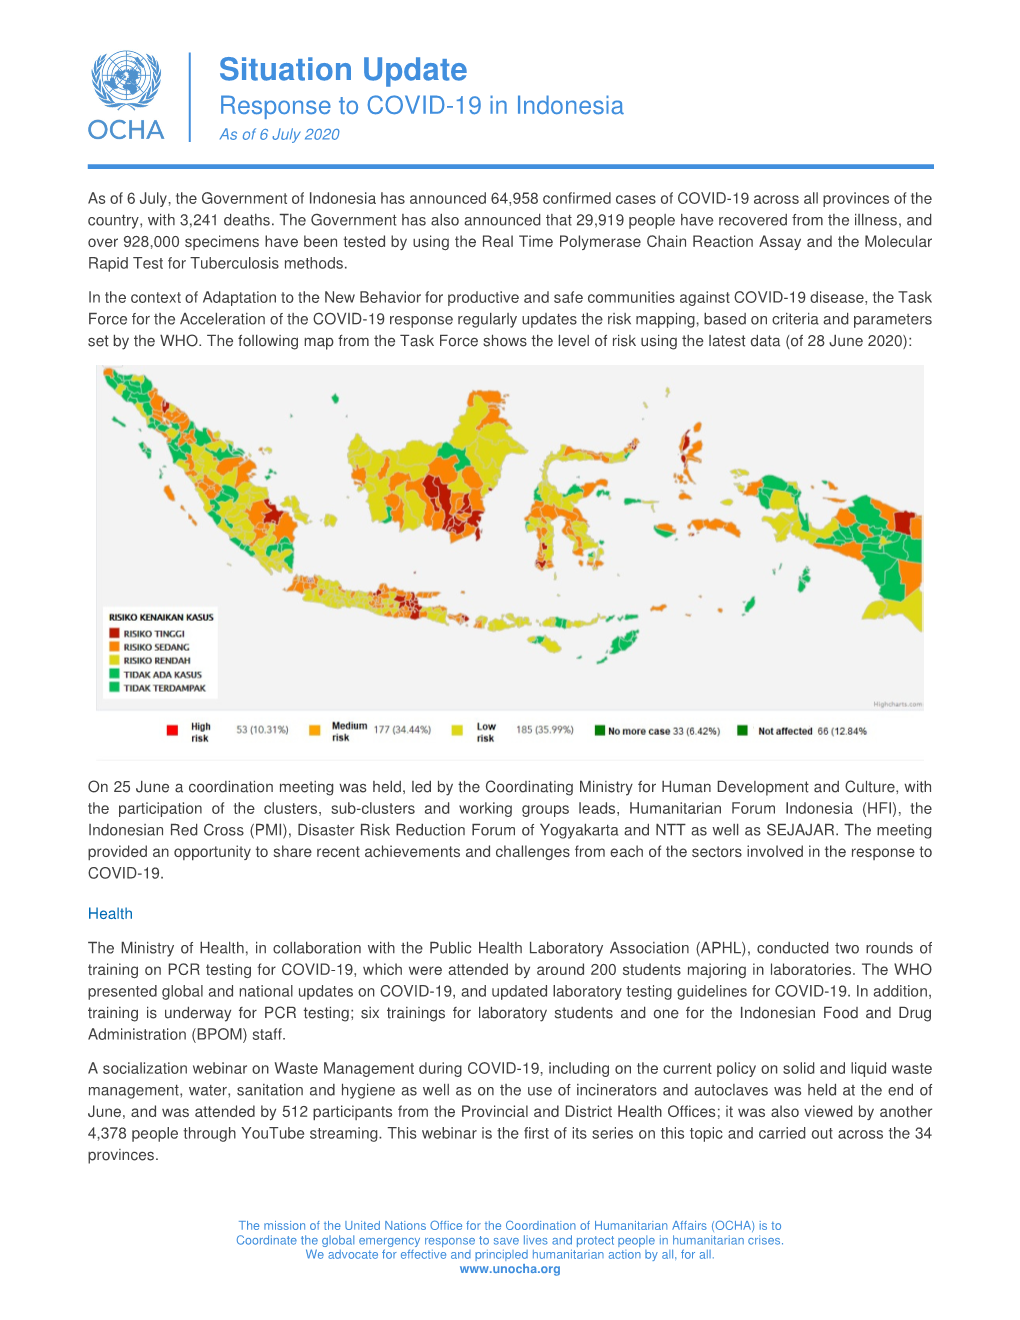 Situation Update Response to COVID-19 in Indonesia As of 6 July 2020